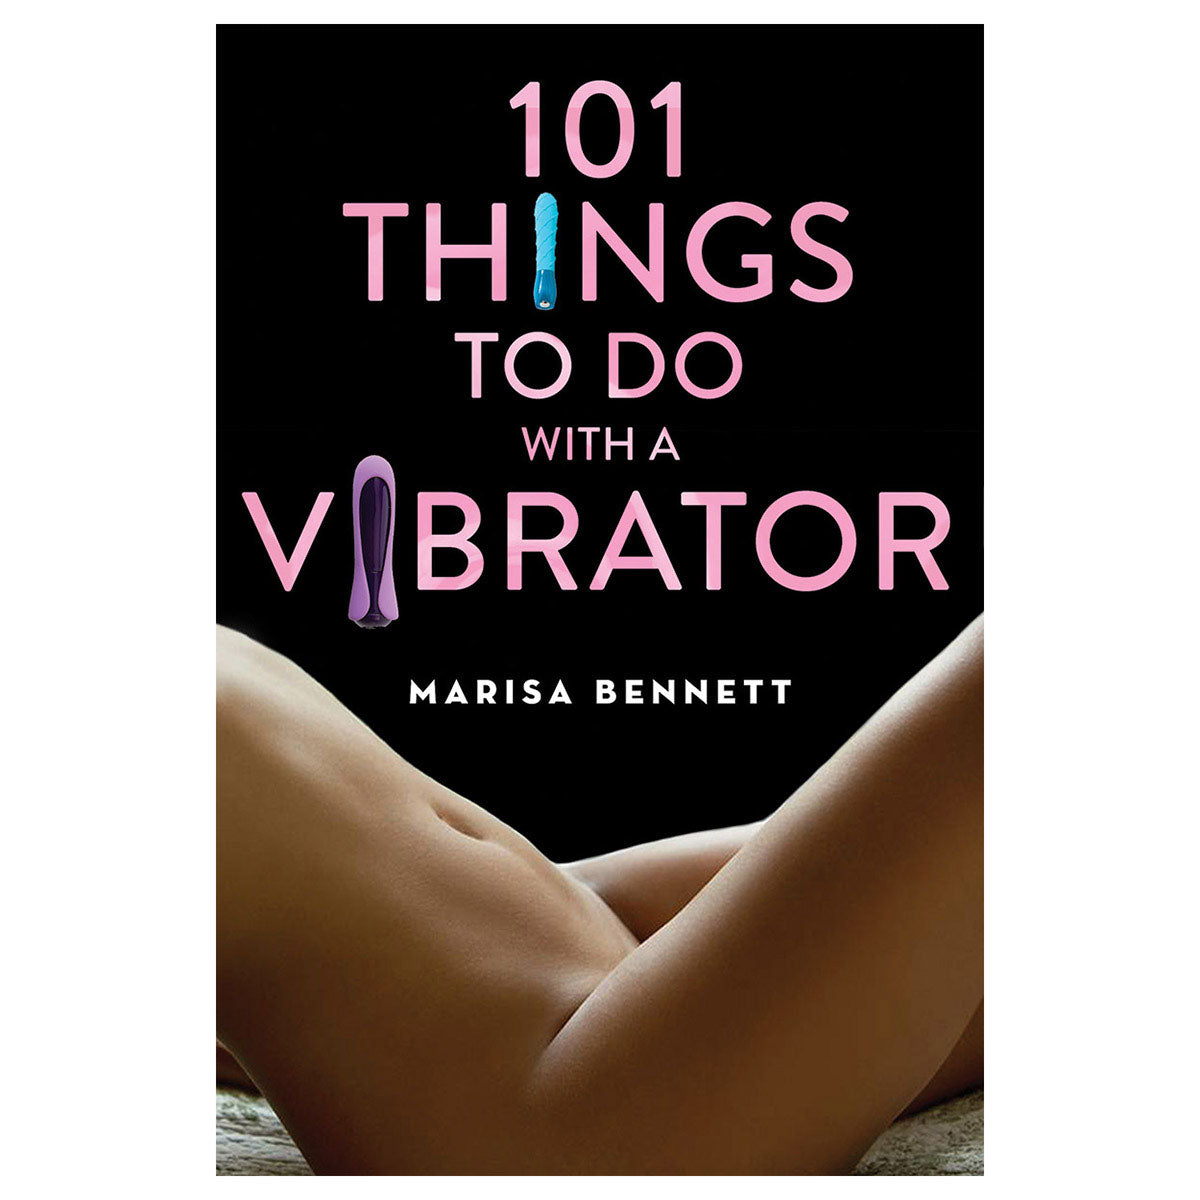 101 Things to Do with a Vibrator - Perseus